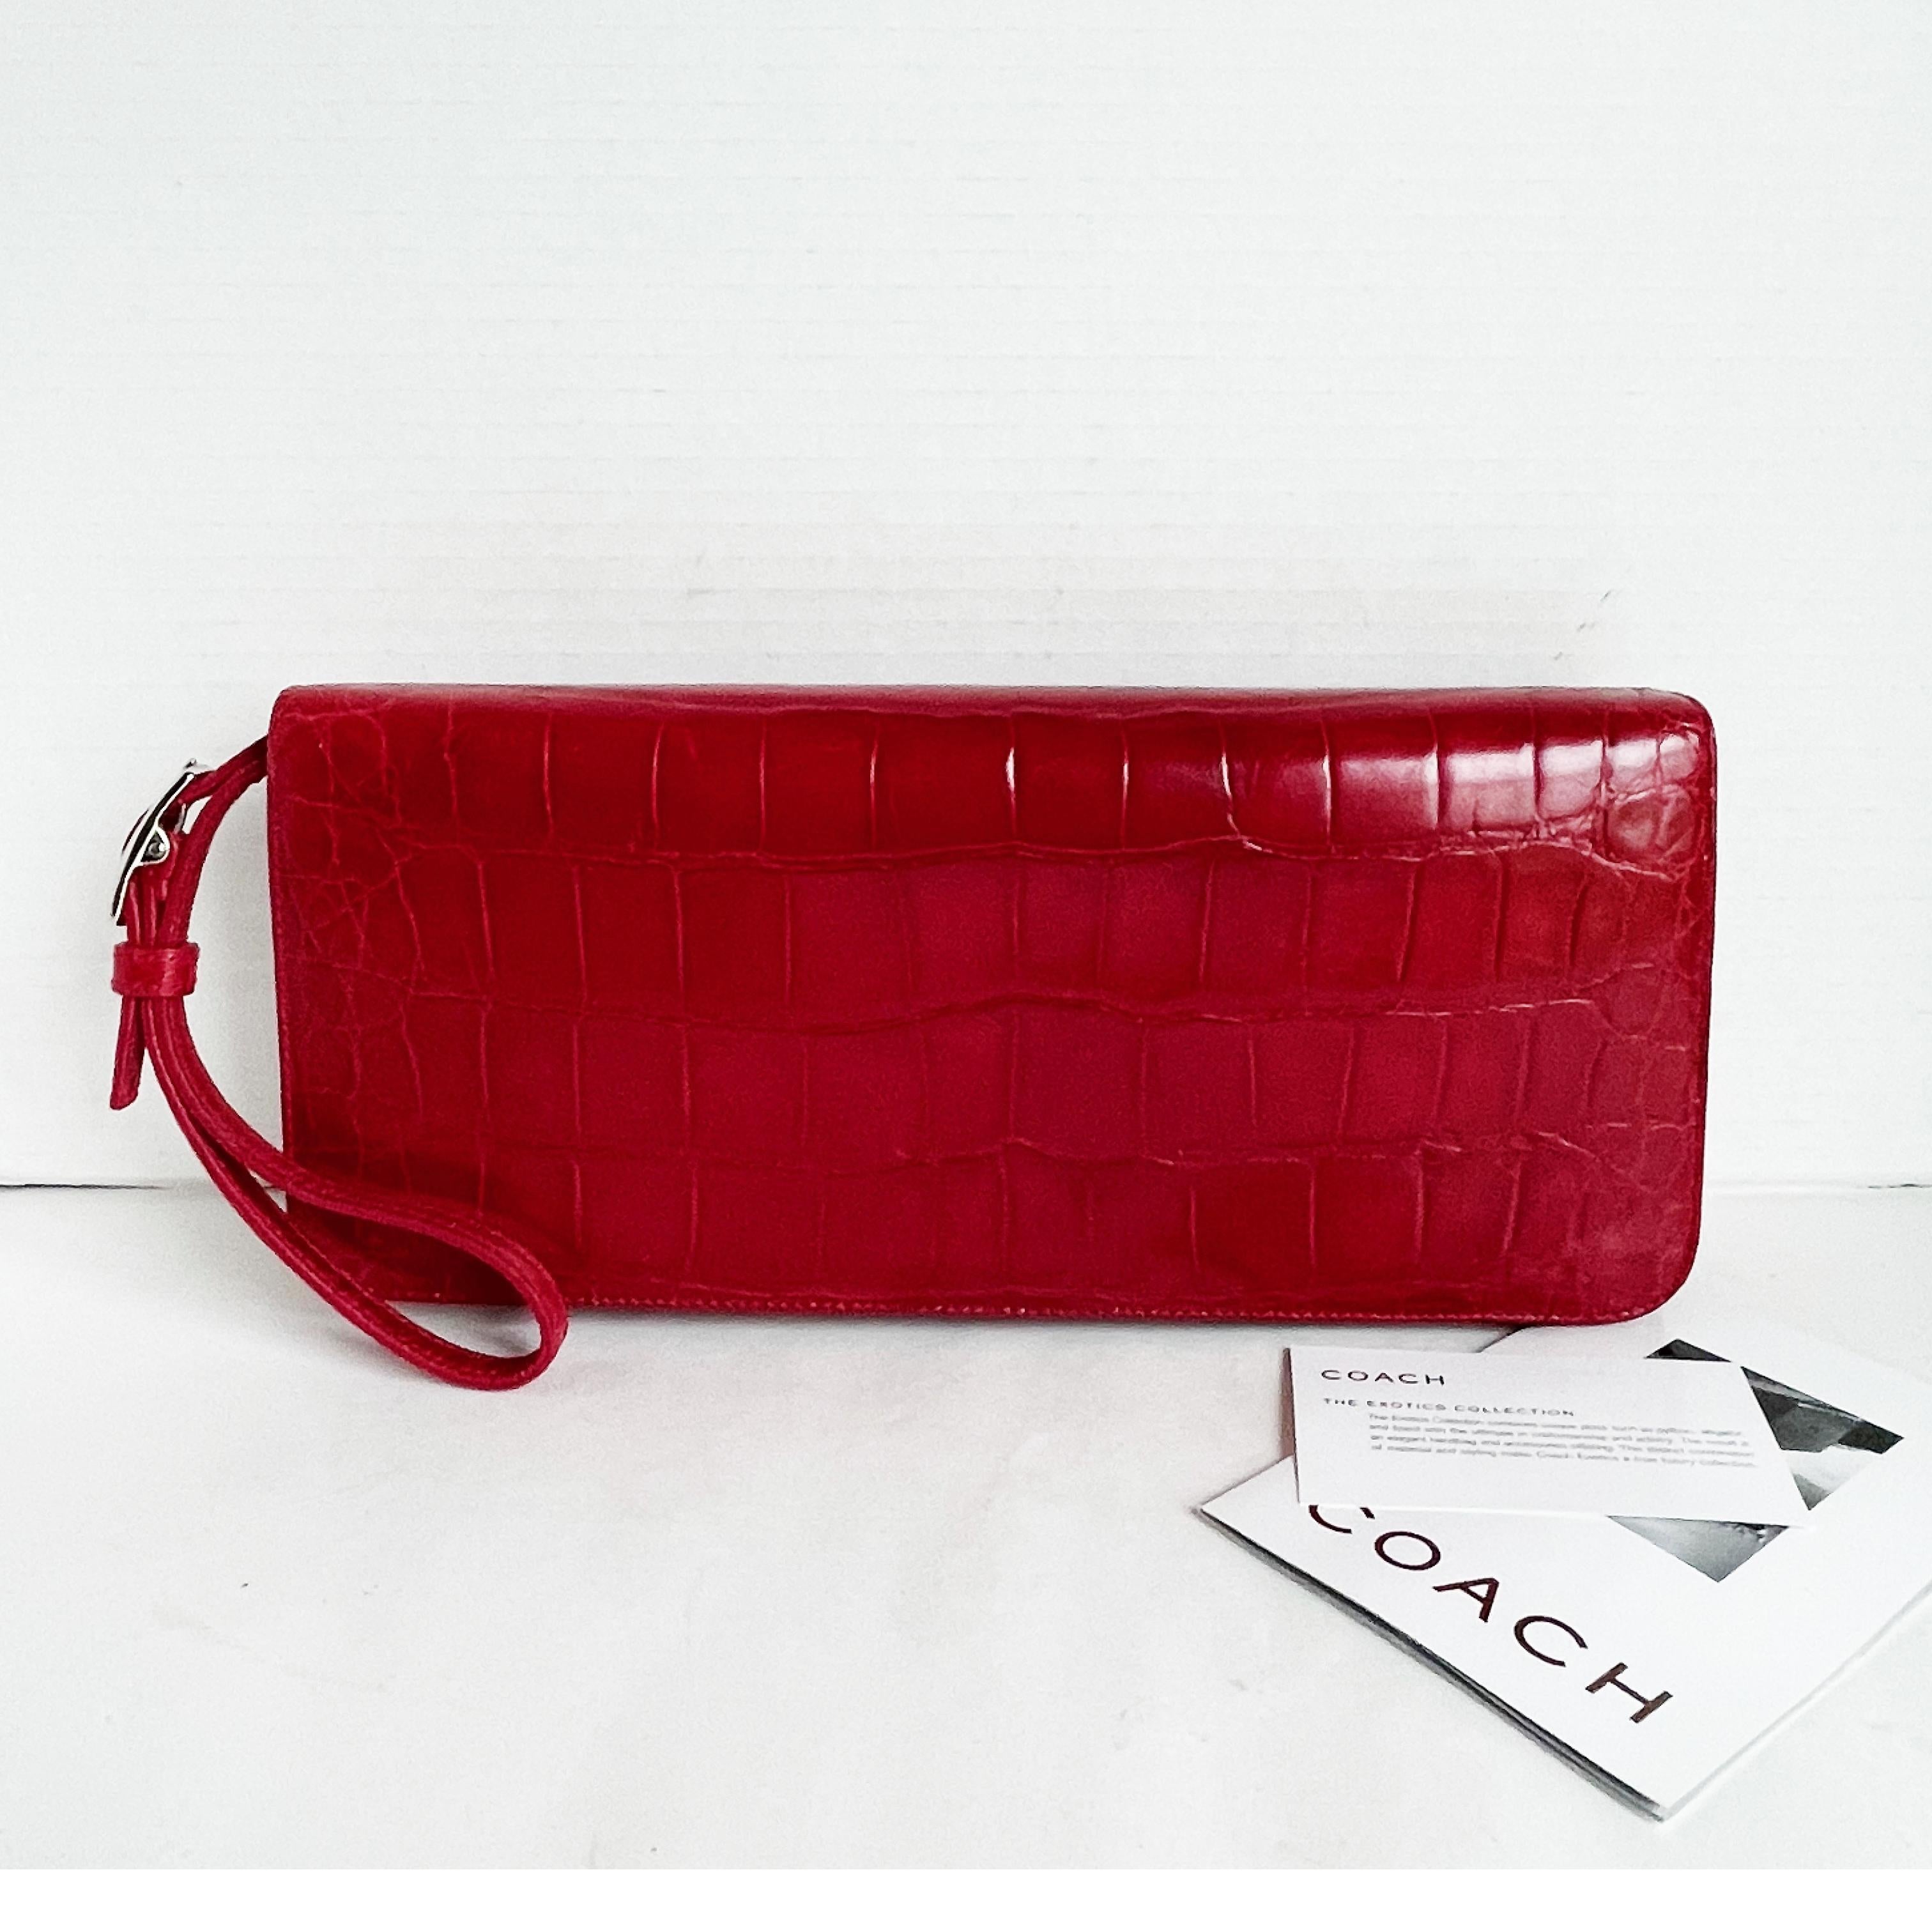 Authentic, preowned Limited Edition Coach Alligator clutch or wristlet bag, from the 2001 Exotic Collection. 

Made from a brilliant glossy red genuine alligator skin, it features a small card slip pocket under the flap and is lined in vachetta &